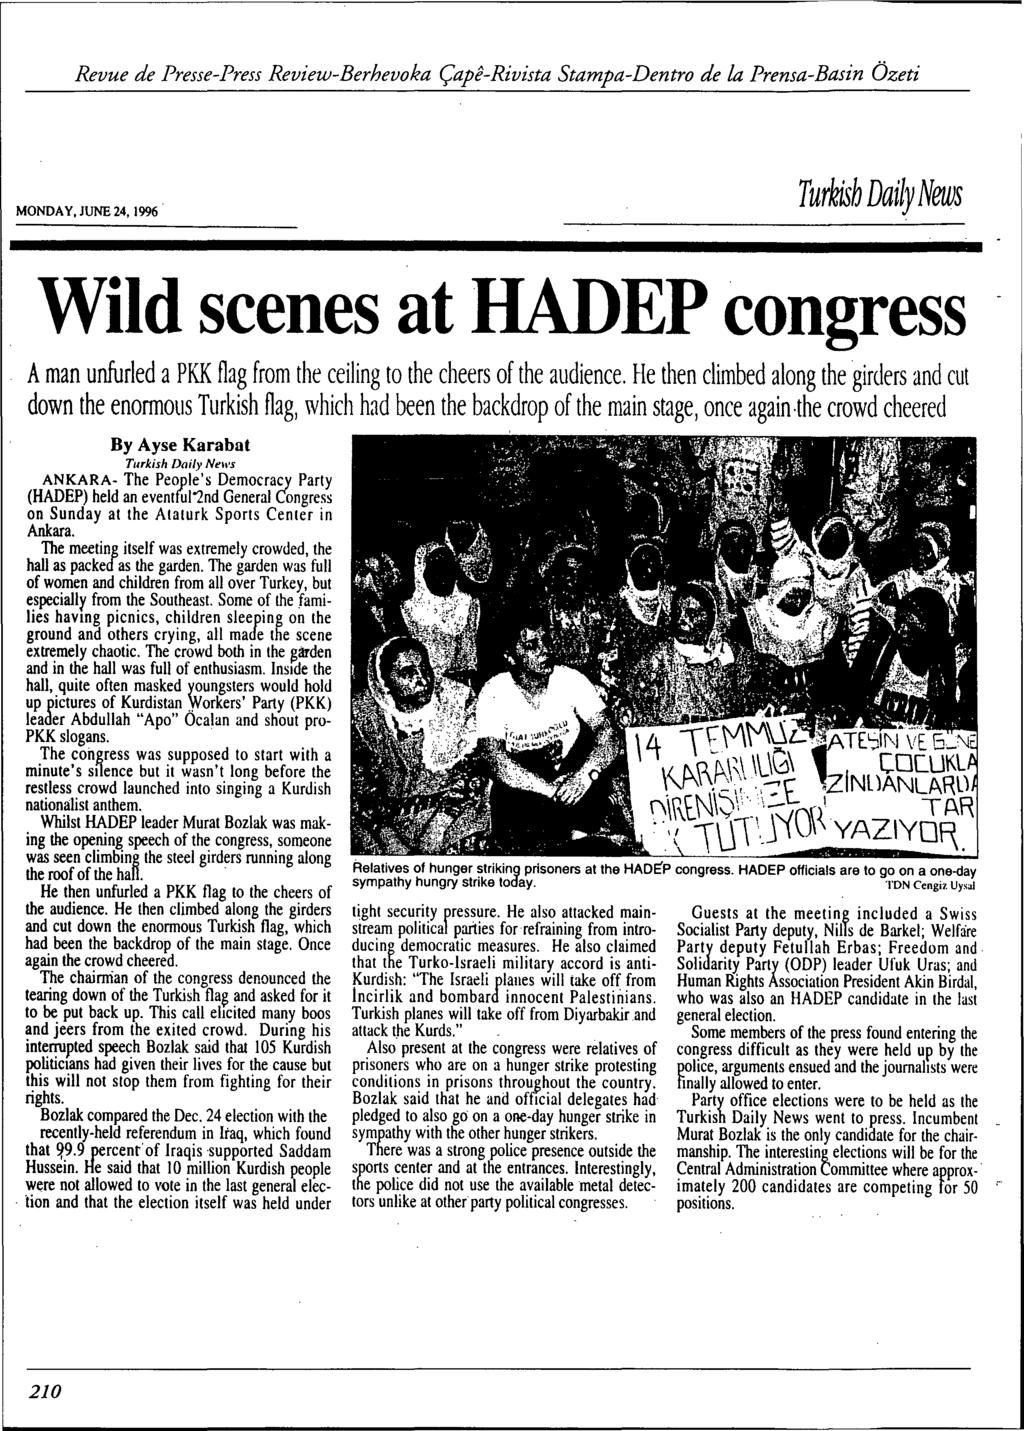 MONDA Y, JUNE 24, 1996. Turkish Daily News Wild scenes at HADEP congress A man unfurled a PKK flag from the ceiling to the cheers of the audience.